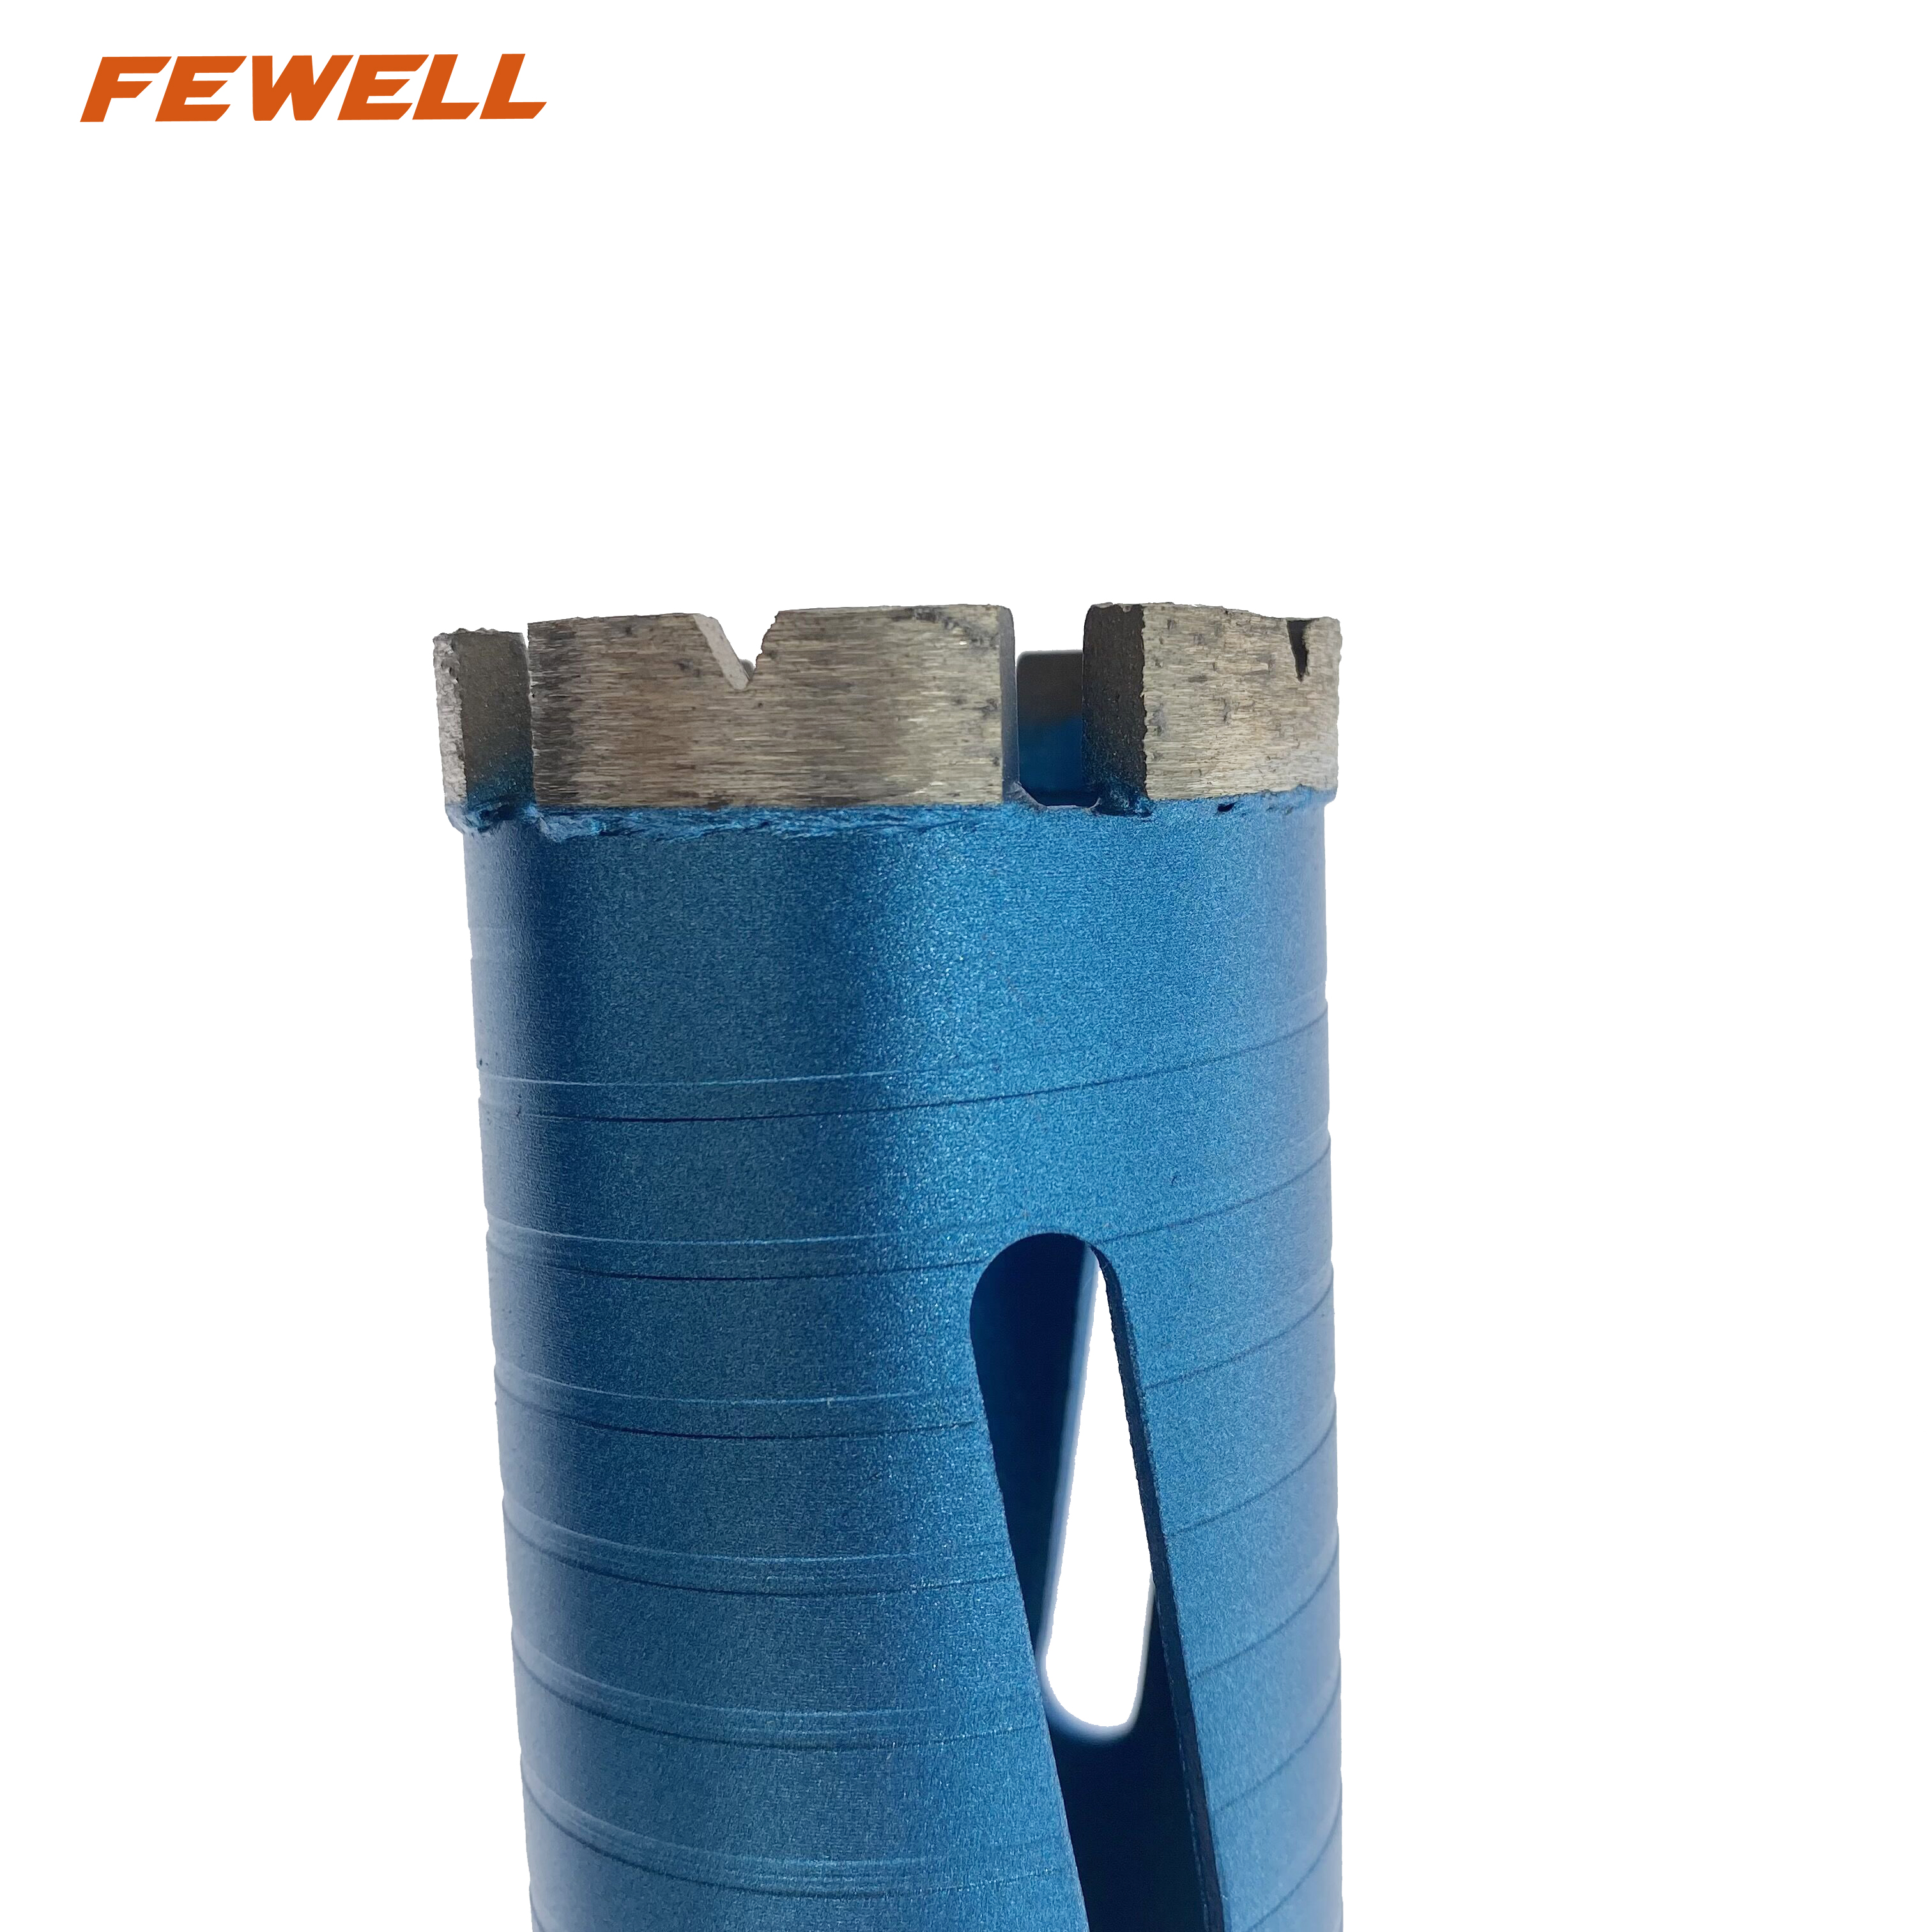 High quality laser welded 50/65/72*10*172*G1/2"BSP roof segmented diamond Core drill bit for granite, reinforced concrete